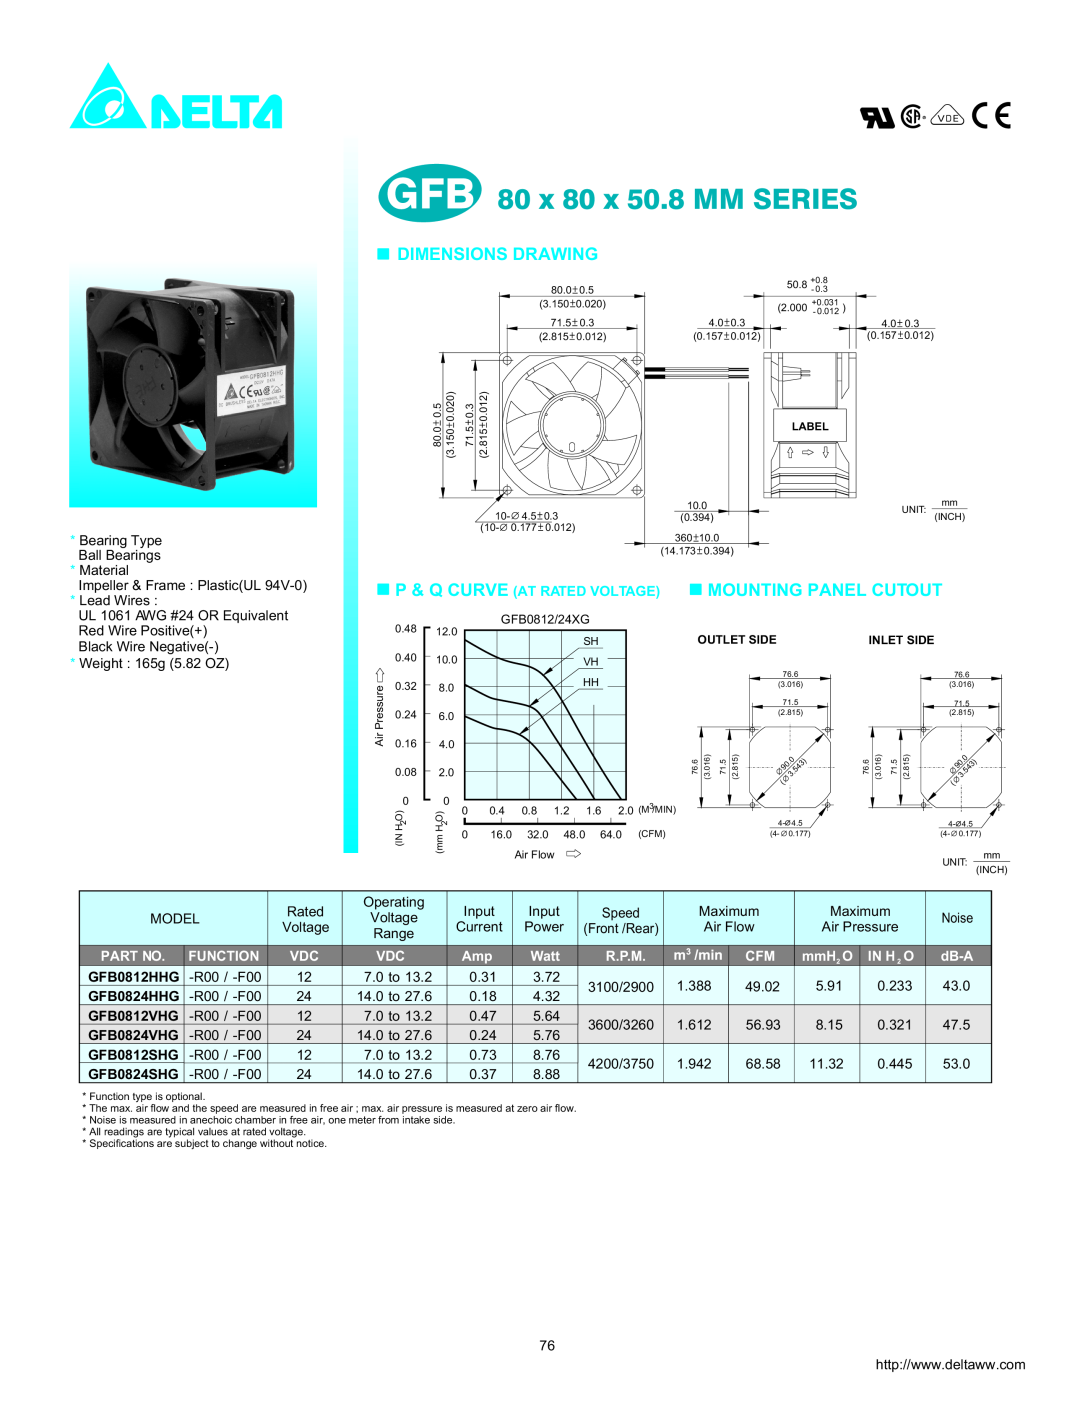 Delta Electronics GFB0812SHG dimensions GFB 80 x 80 x 50.8 MM SERIES, Dimensions Drawing, Mounting Panel Cutout, Function 